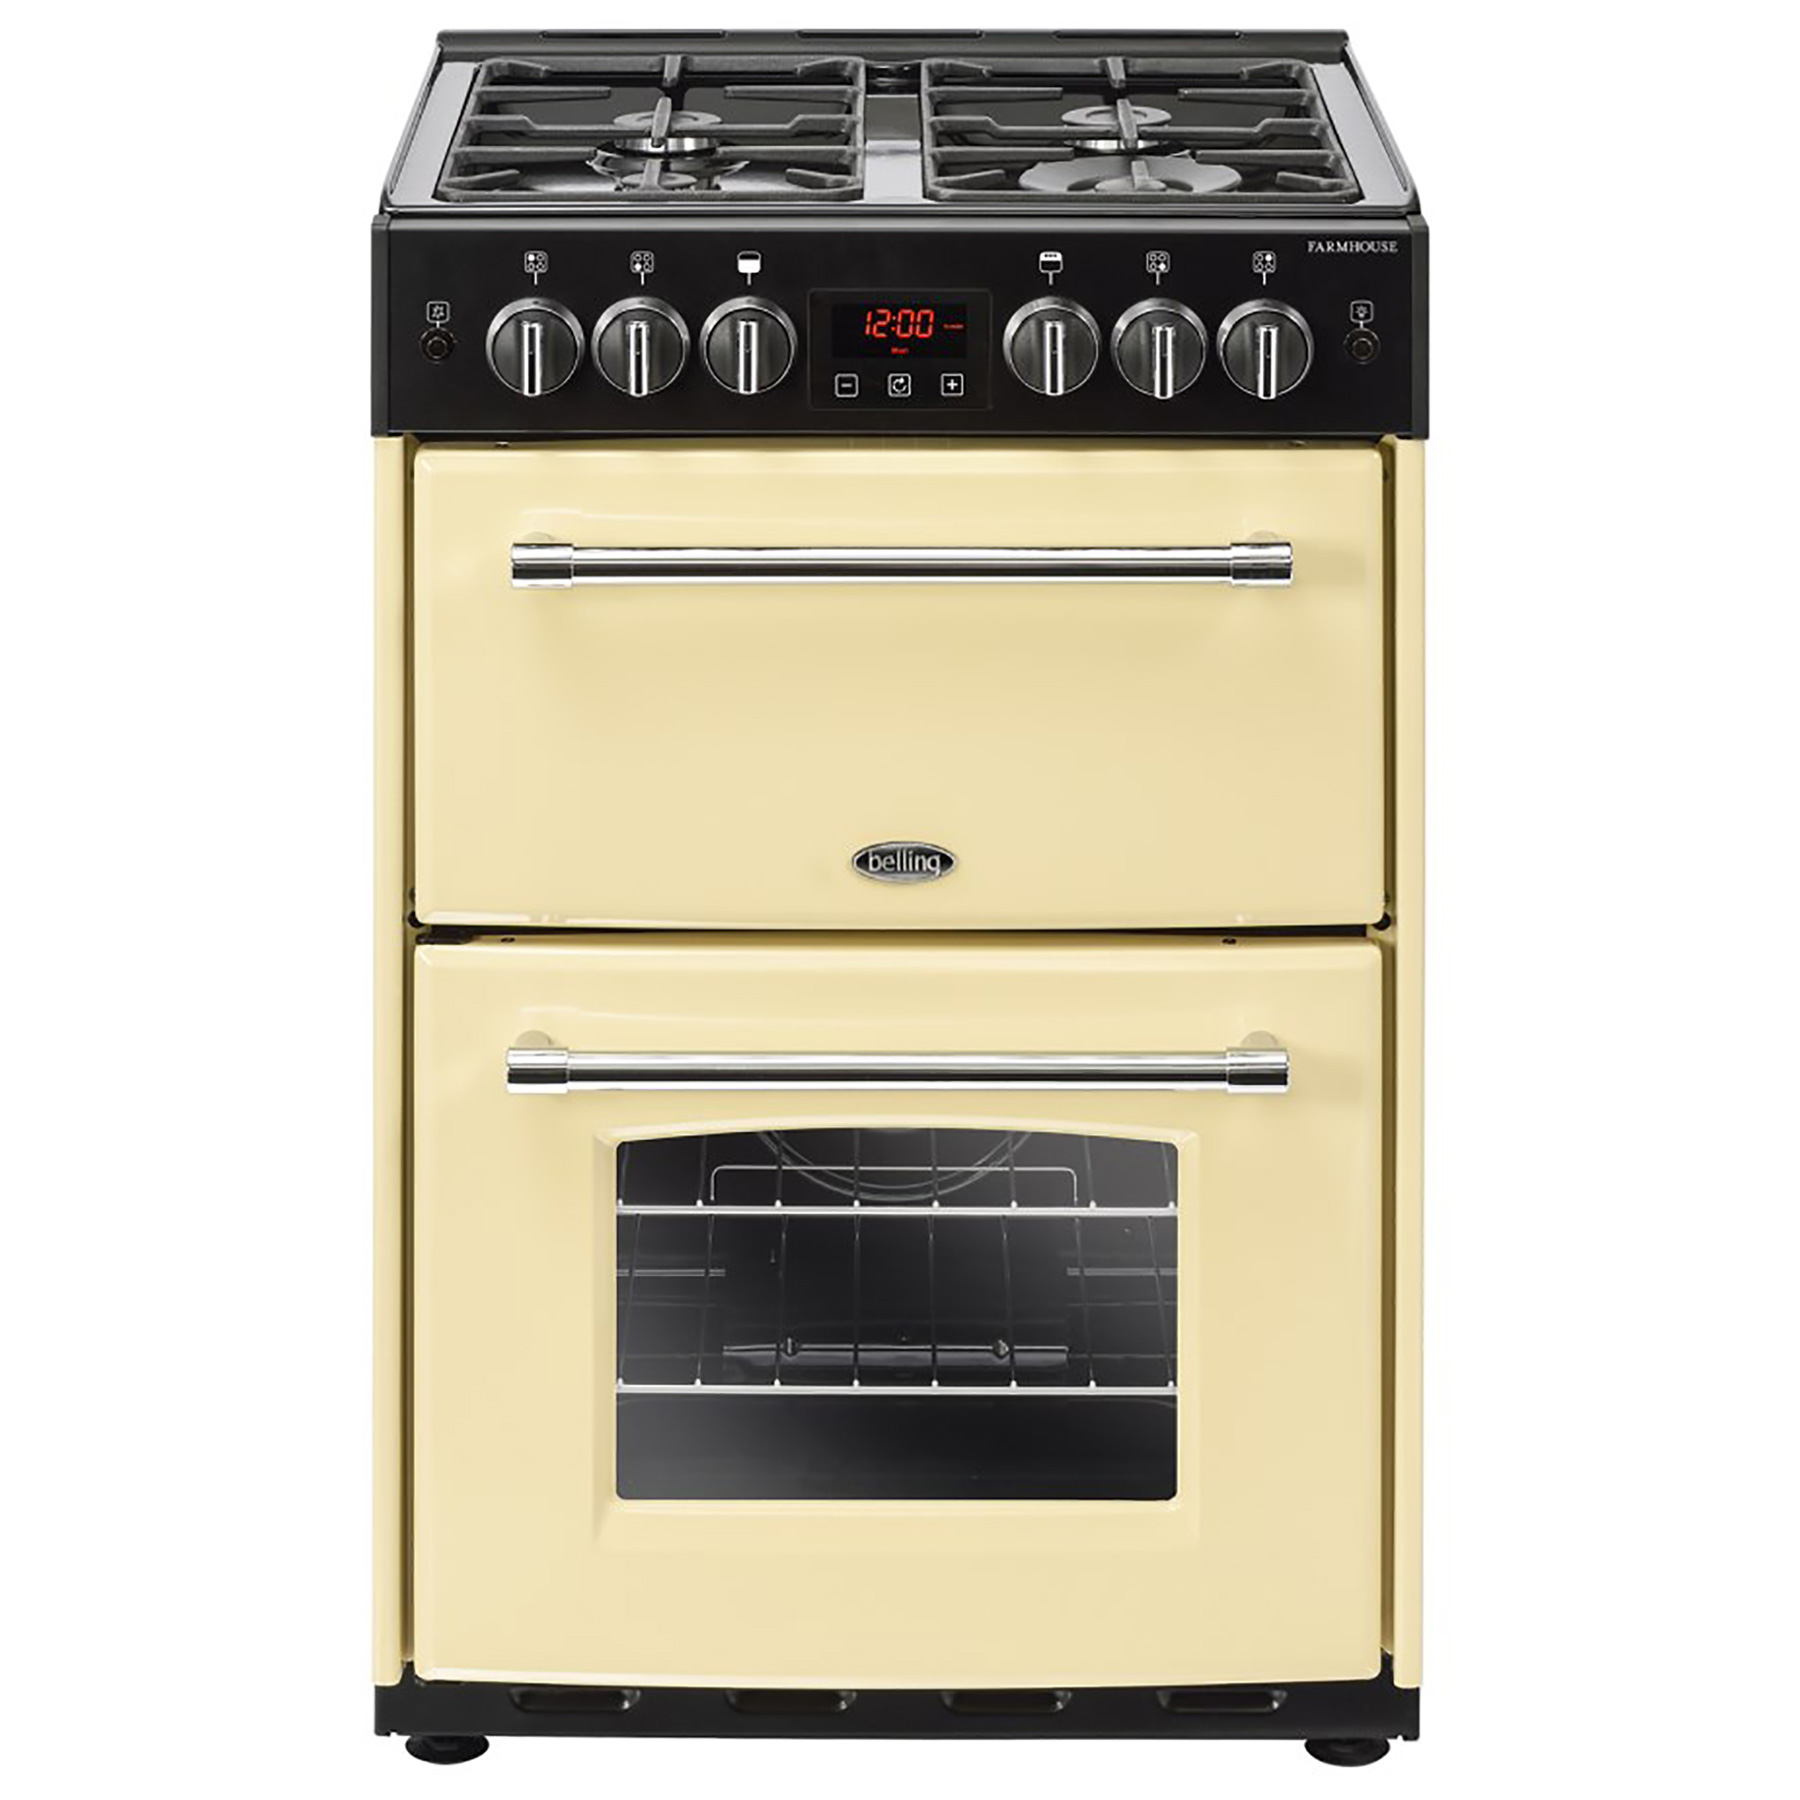 Image of Belling 444444716 60cm Farmhouse 60G Double Oven Gas Cooker in Cream